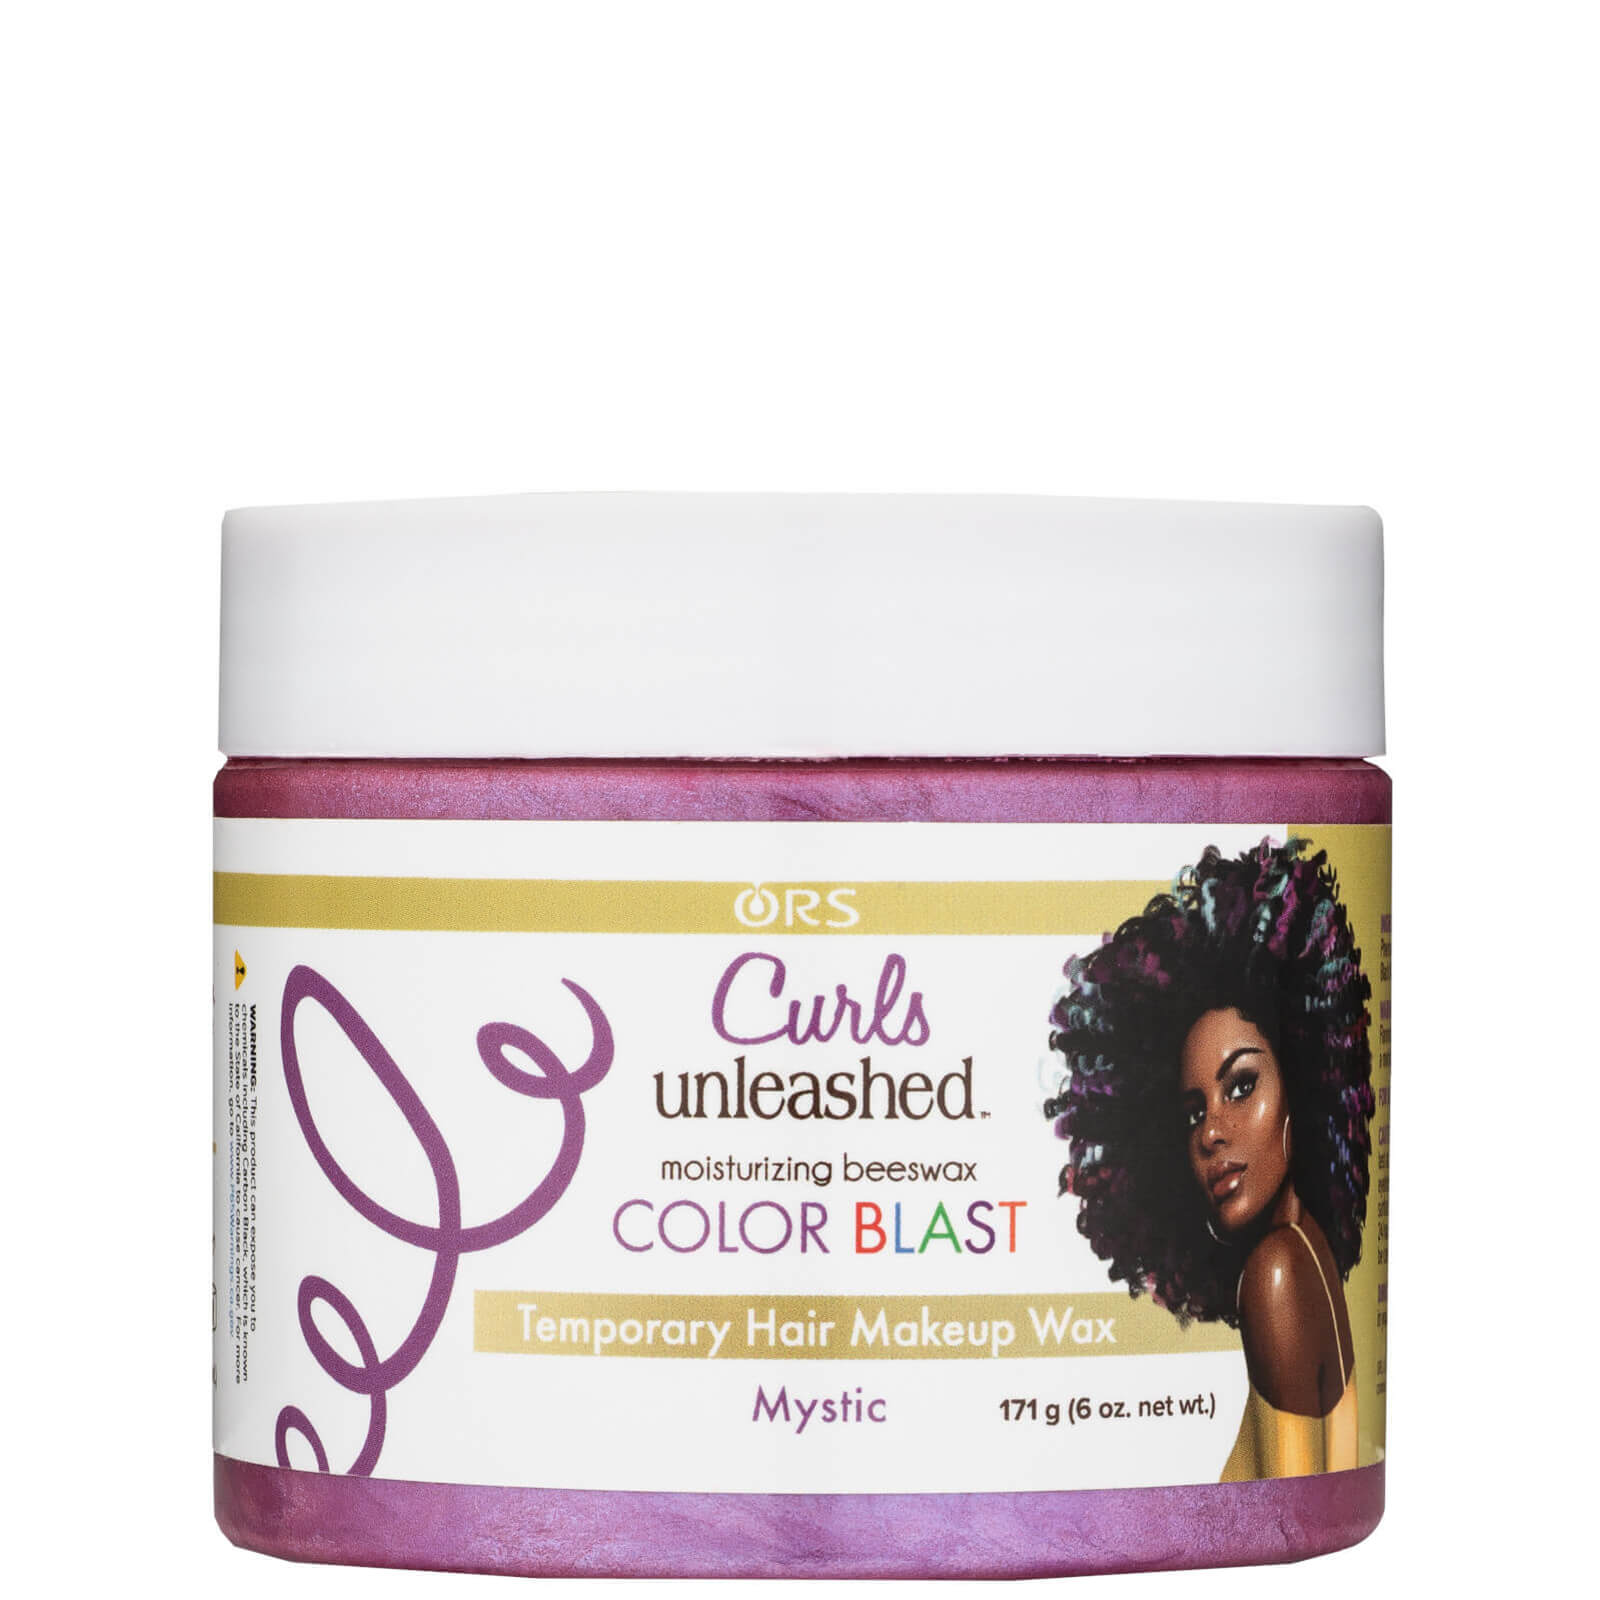 Image of Hair Makeup Wax Curls Unleashed Colour Blast Temporary - Mystic ORS